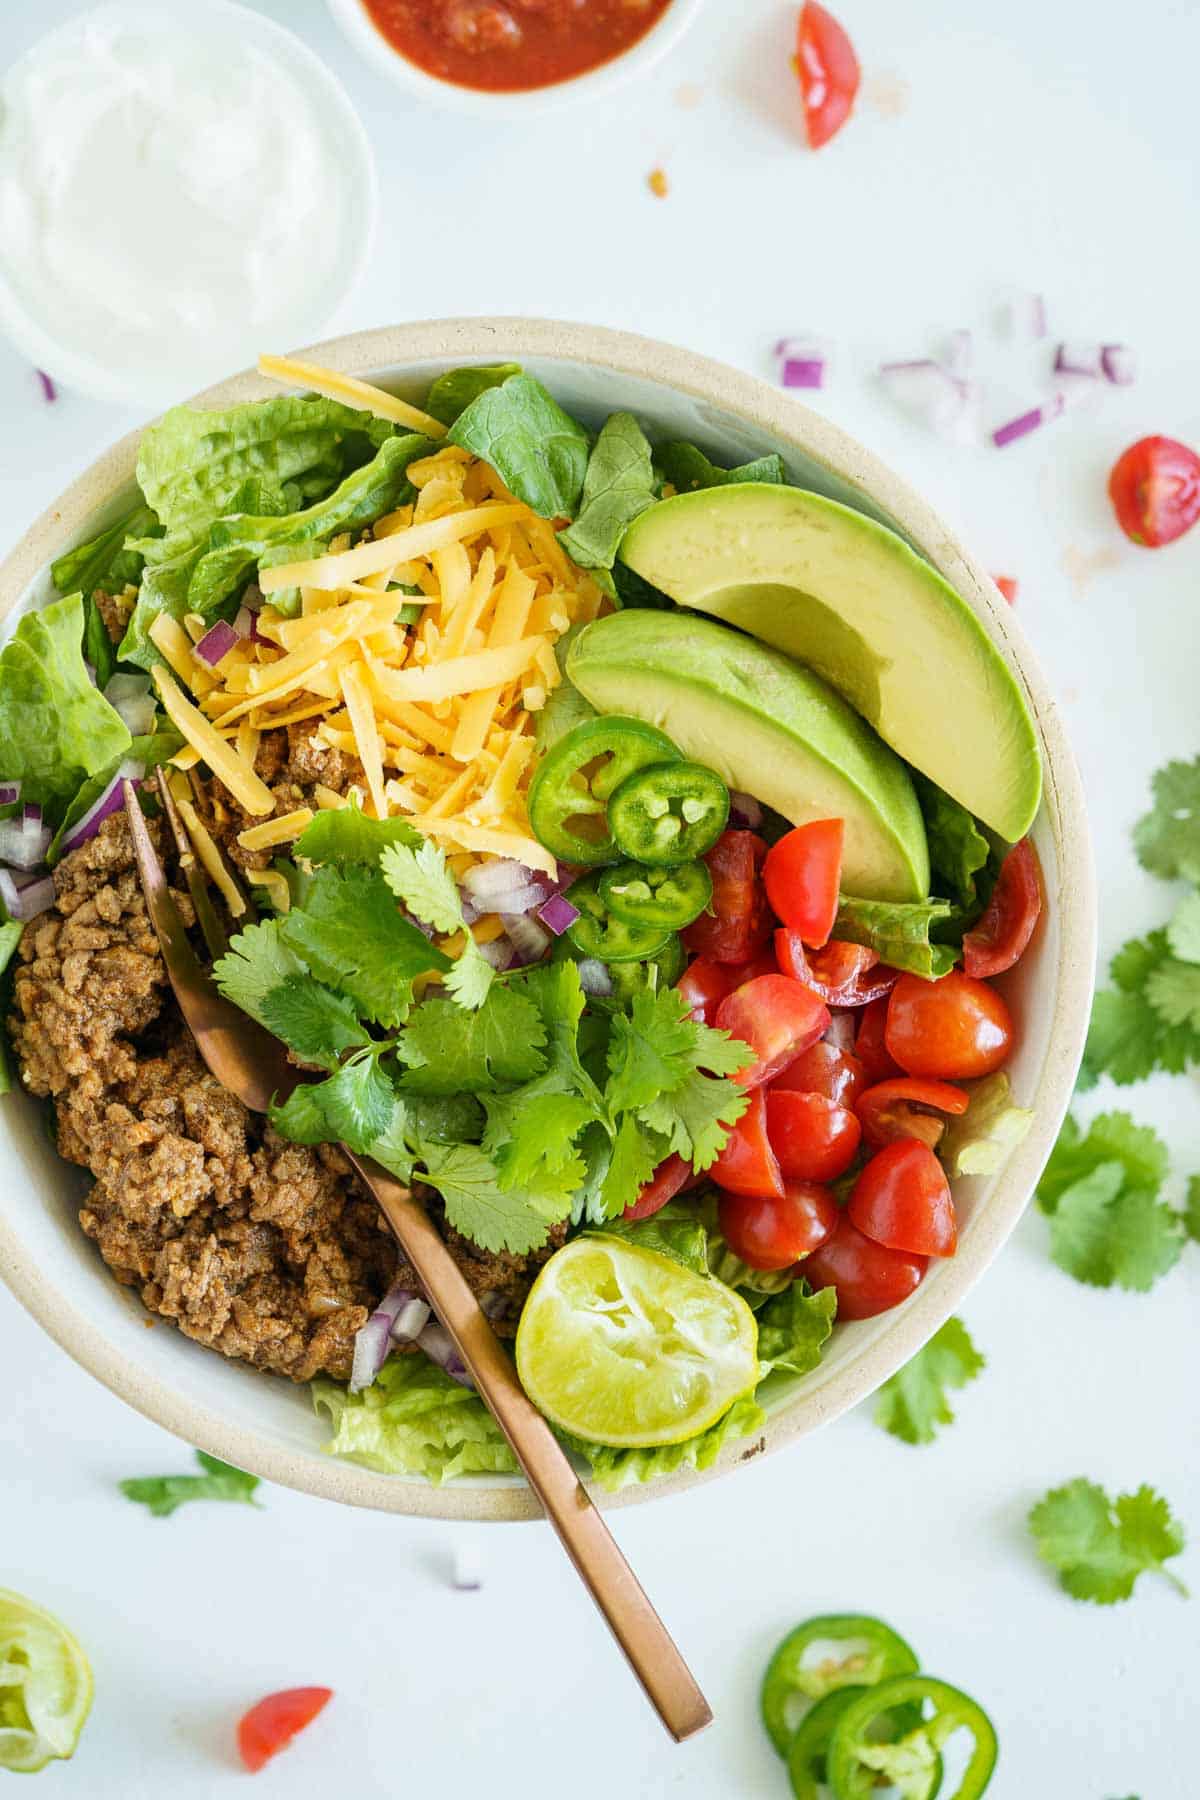 A birds-eye view of a ground beef taco salad with a fork in it and some of the toppings scattered on the countertop.